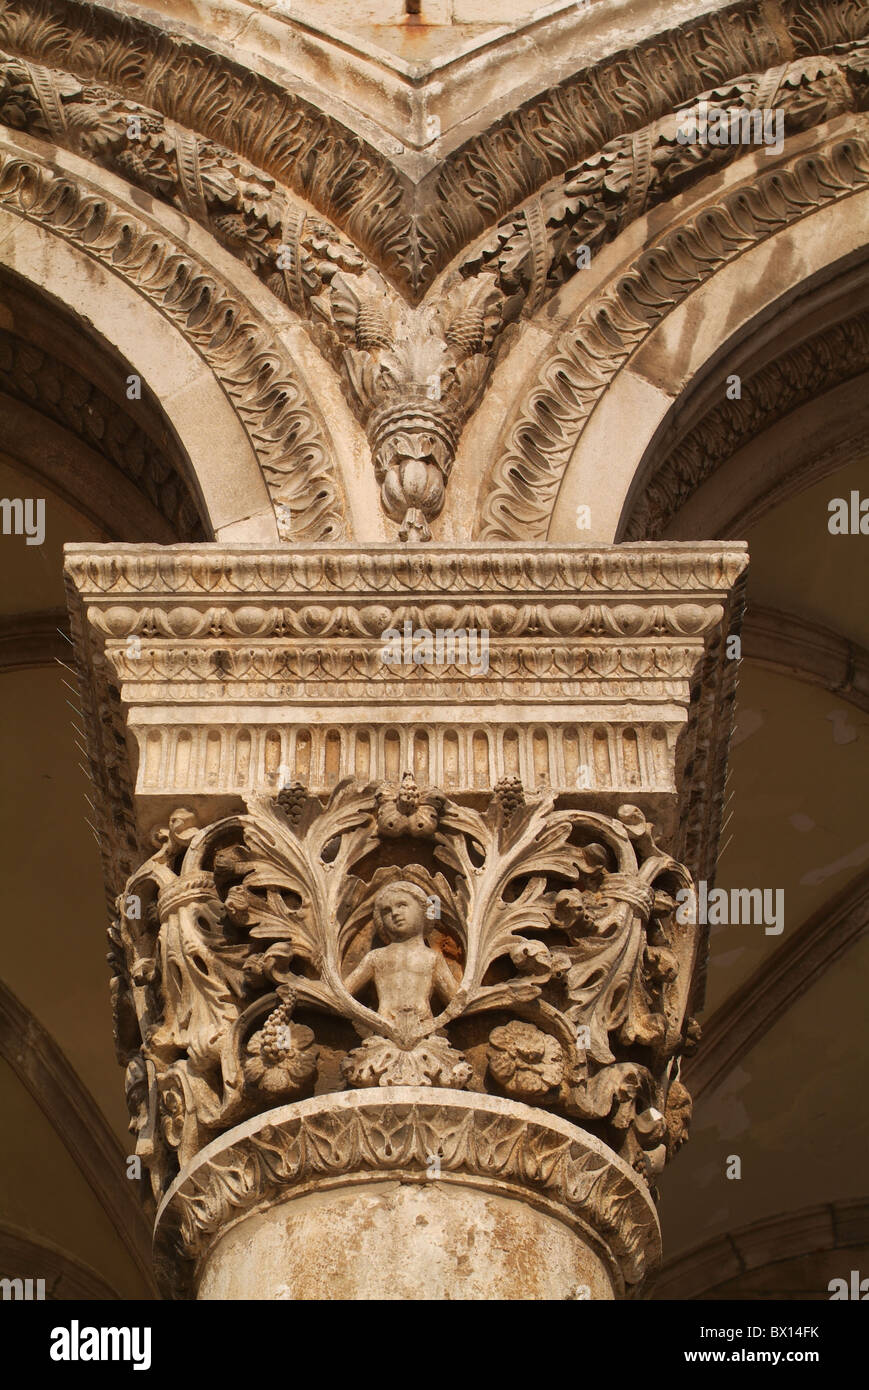 column detail capital round arch architecture Middle Ages Dubrovnik old town Croatia Europe coast Adriatic Stock Photo